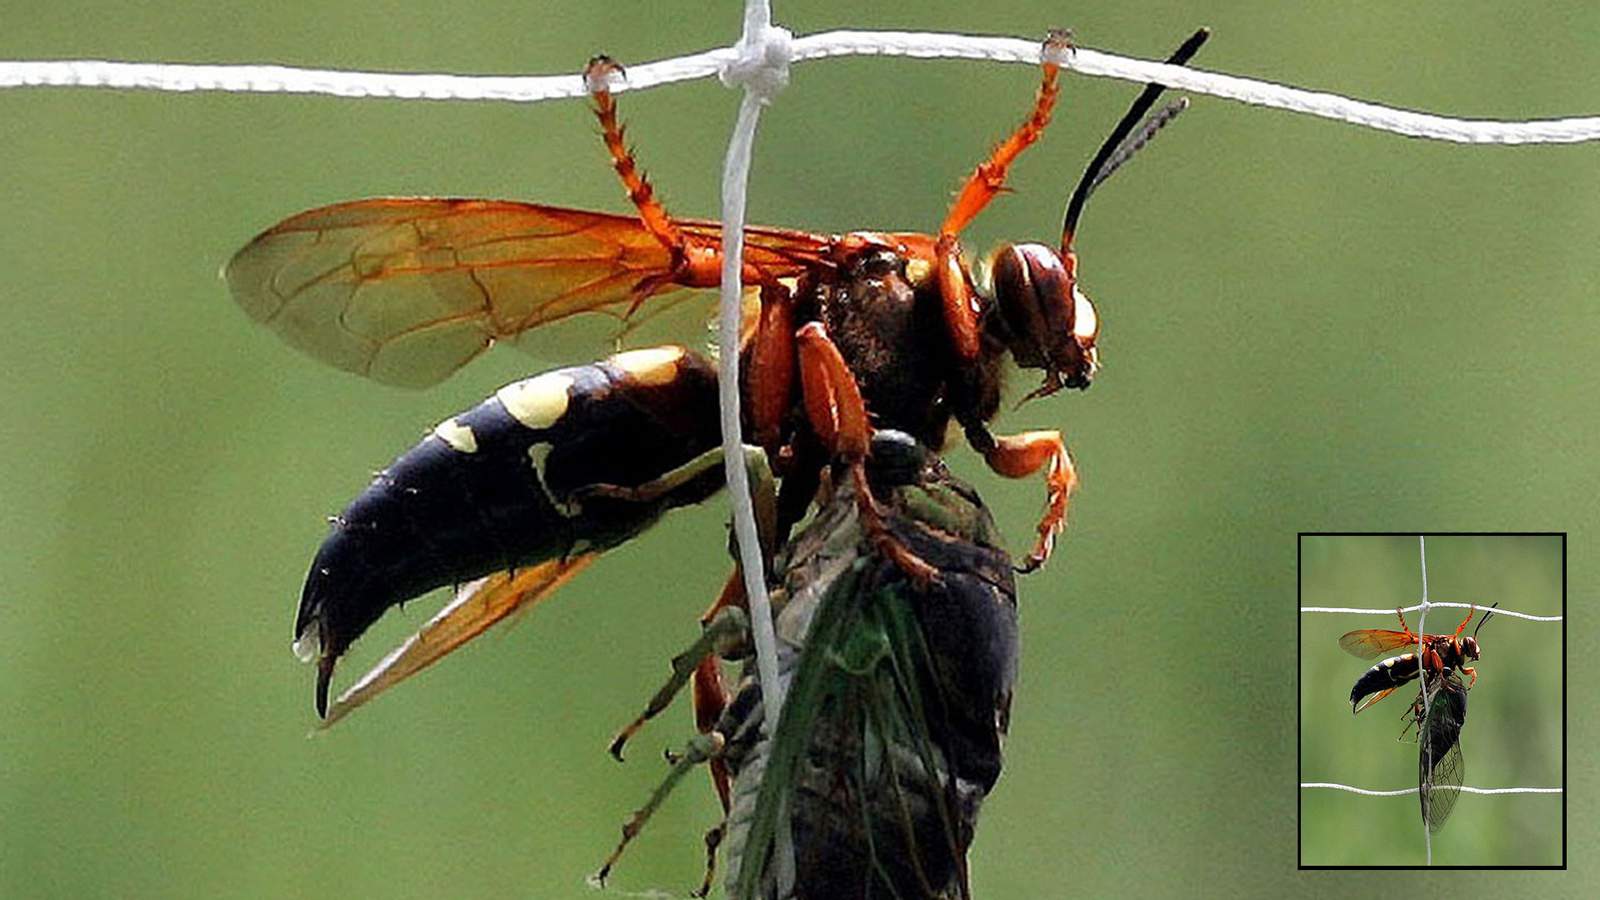 People in San Antonio may think they’re seeing murder hornets, here’s what they really are